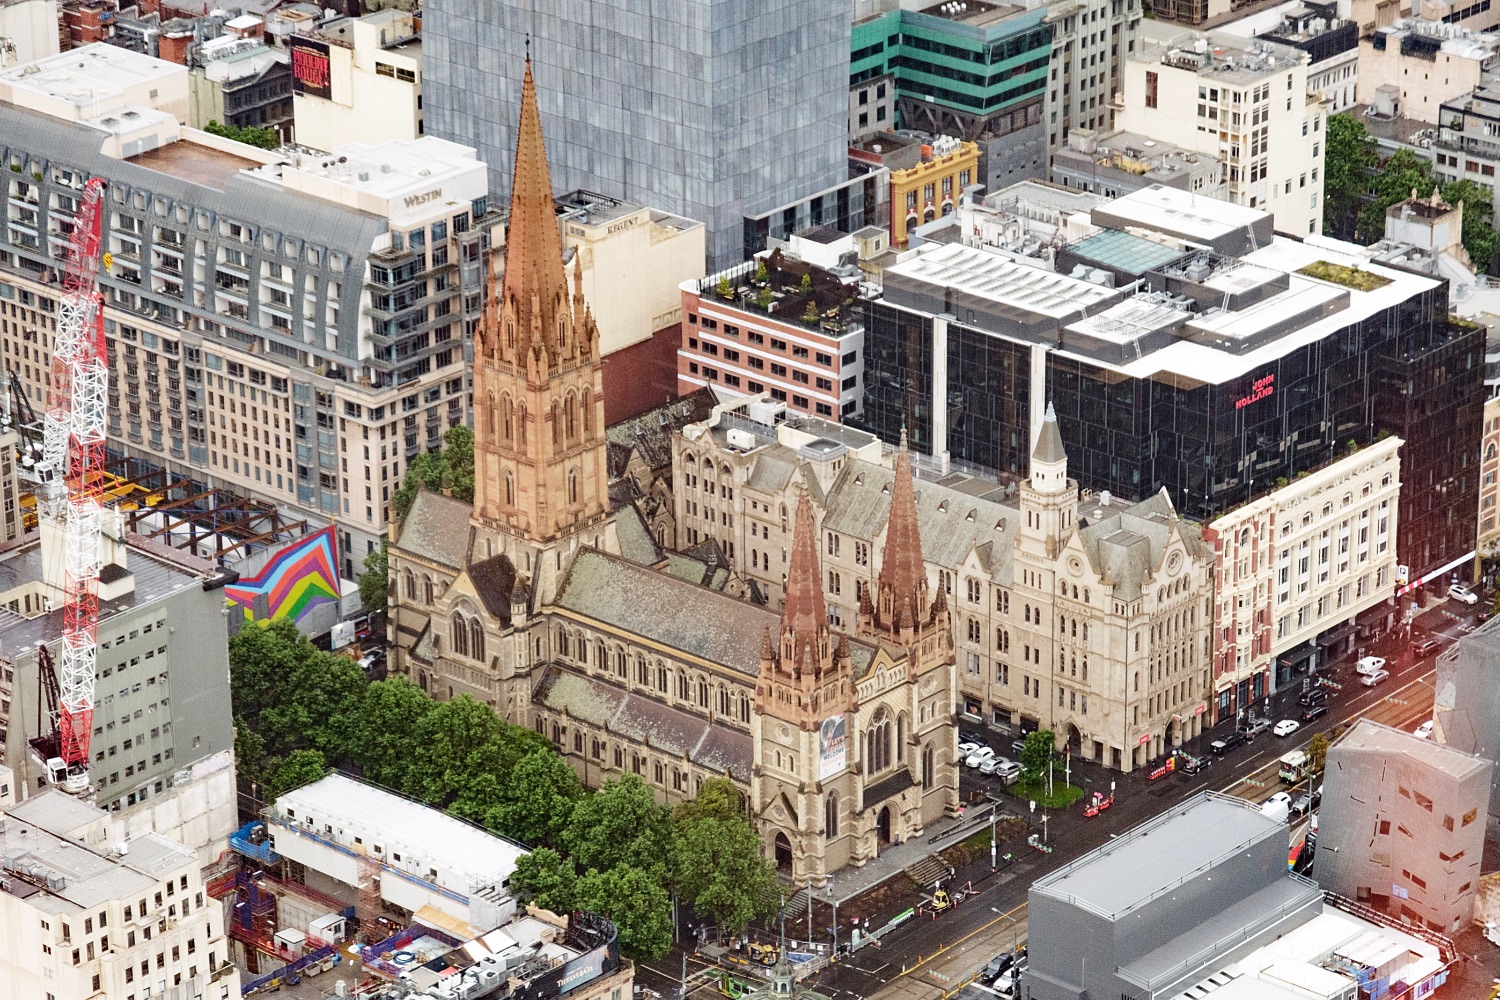 Melbourne, views of St. Patrick's Cathedral from the Eureka Tower